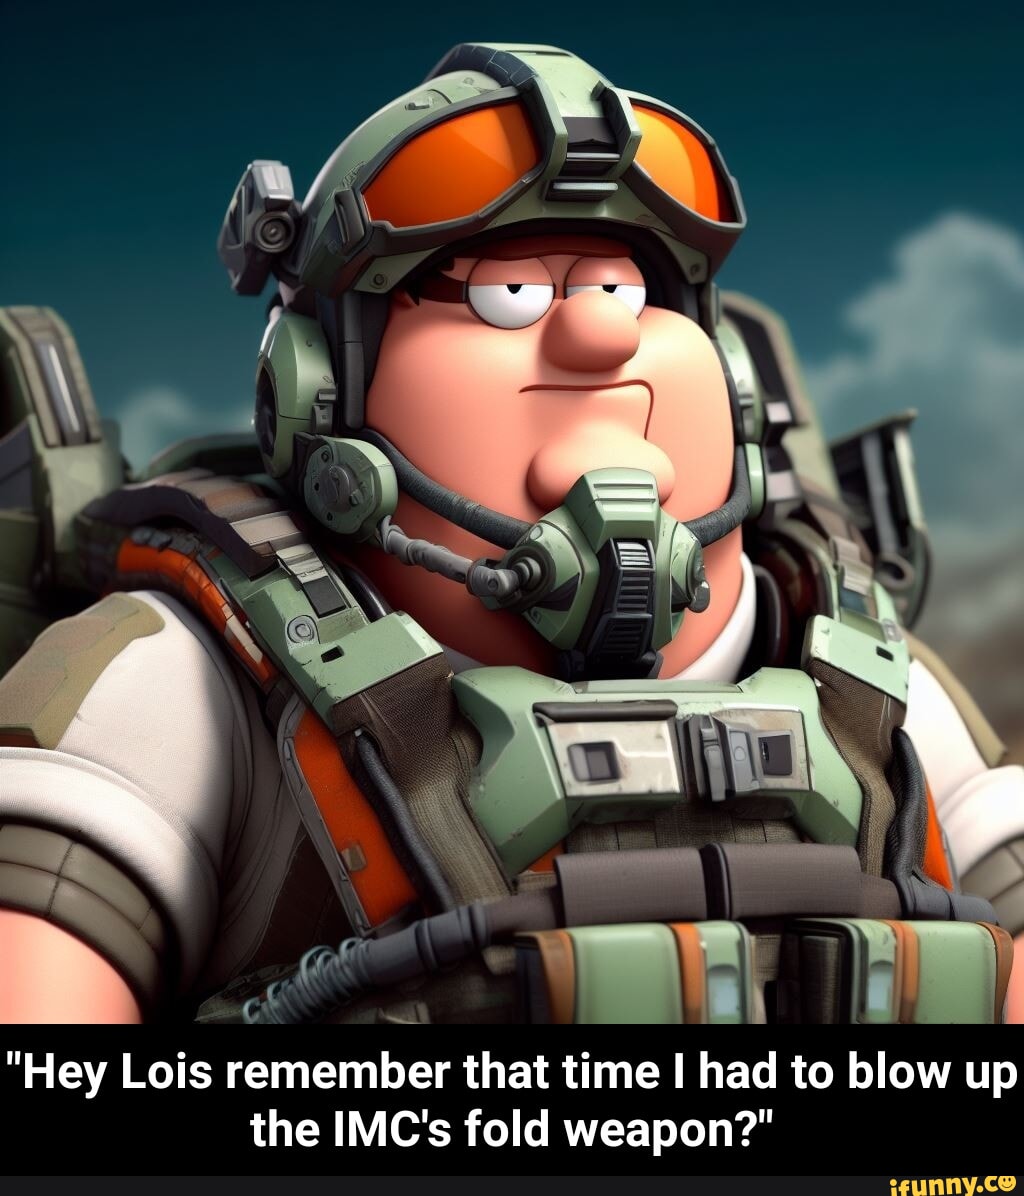 Hey Lois remember that time I had to blow up the IMC's fold weapon